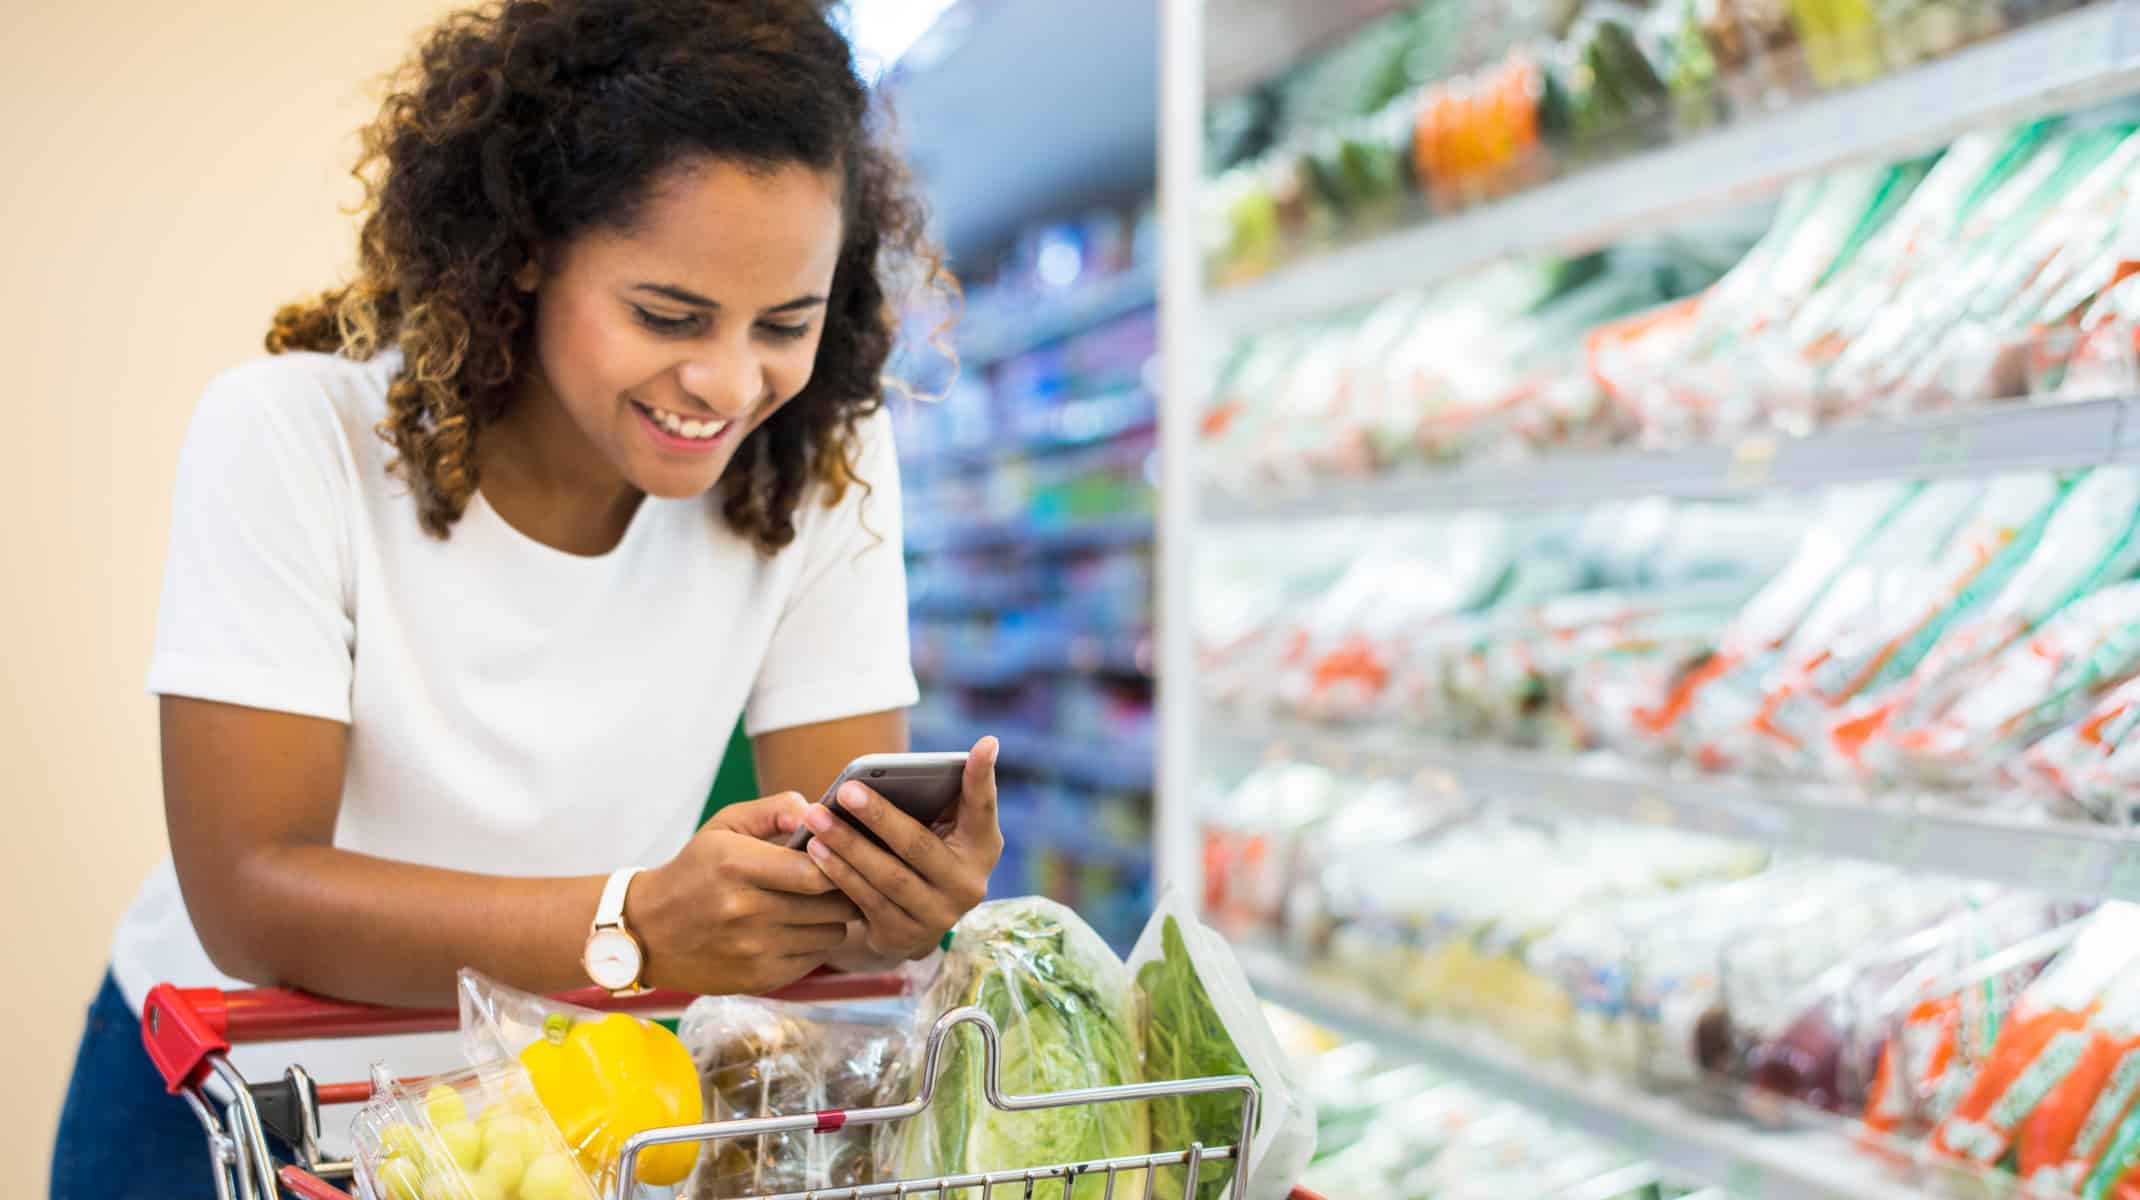 Top 6 benefits of mobile marketing in retail: Everything you need to know for 2021